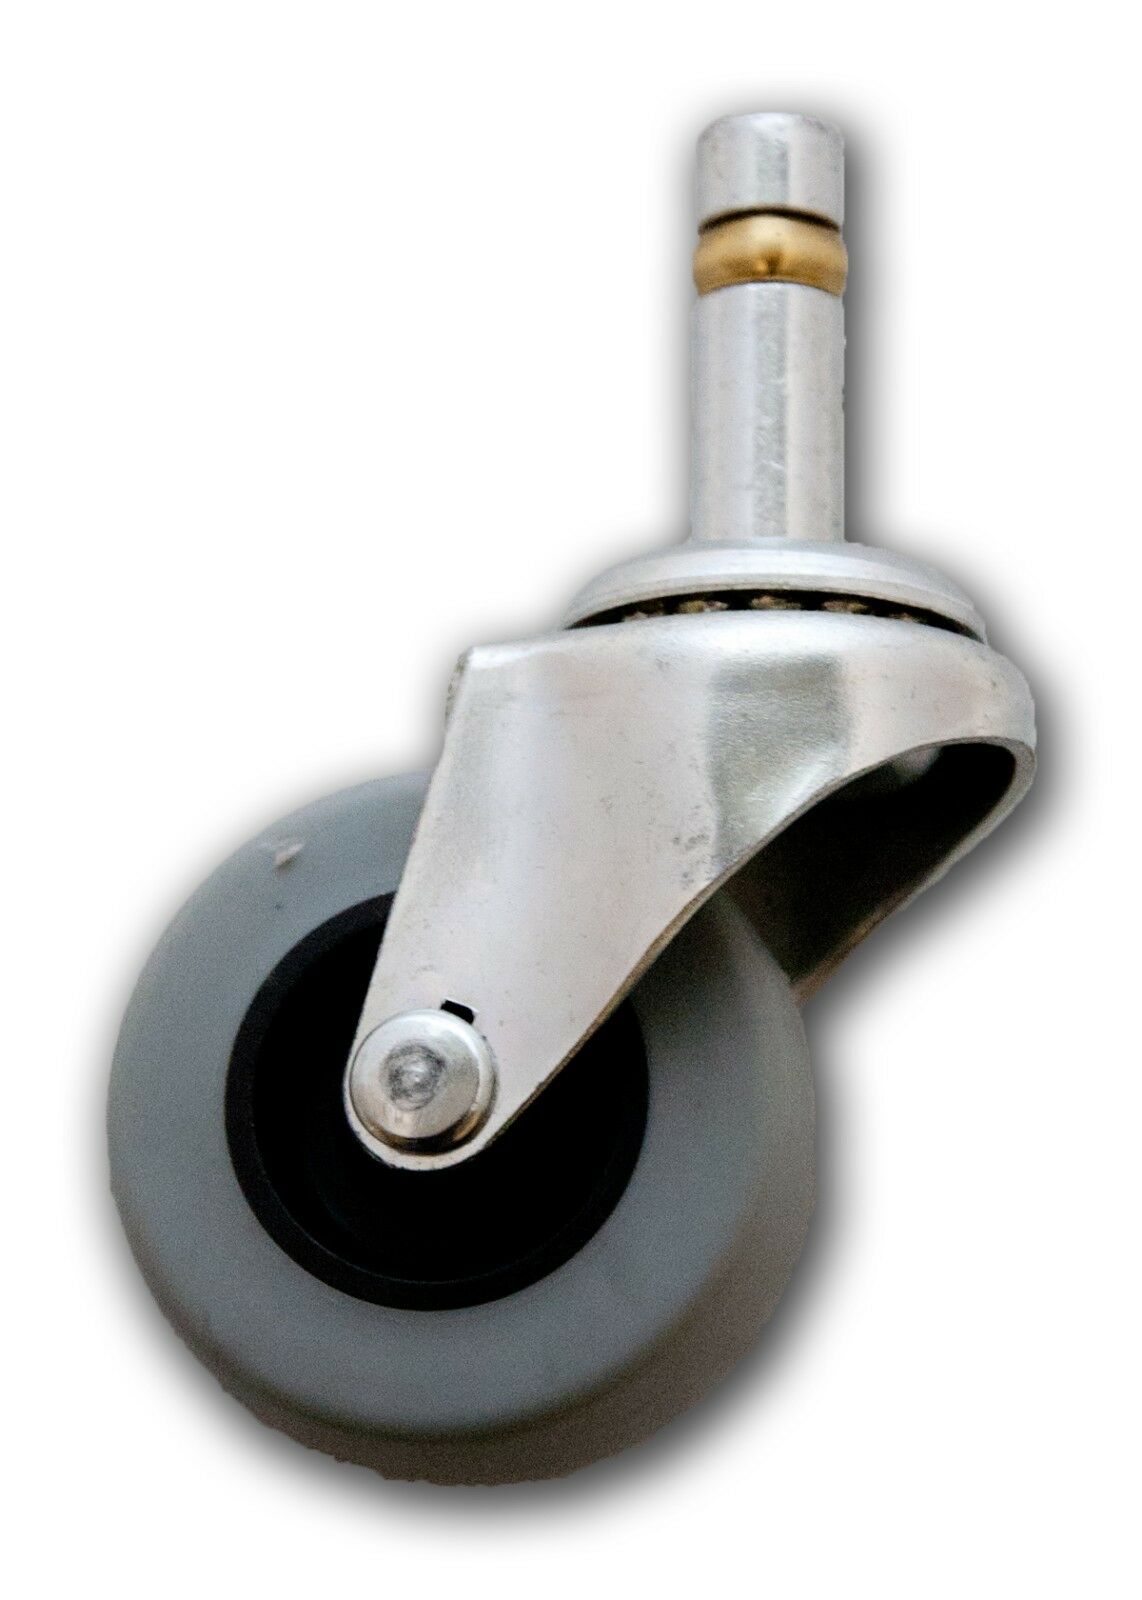 2" Swivel Tpr Caster With 7/16" X 1-7/16" Grip Ring Stem